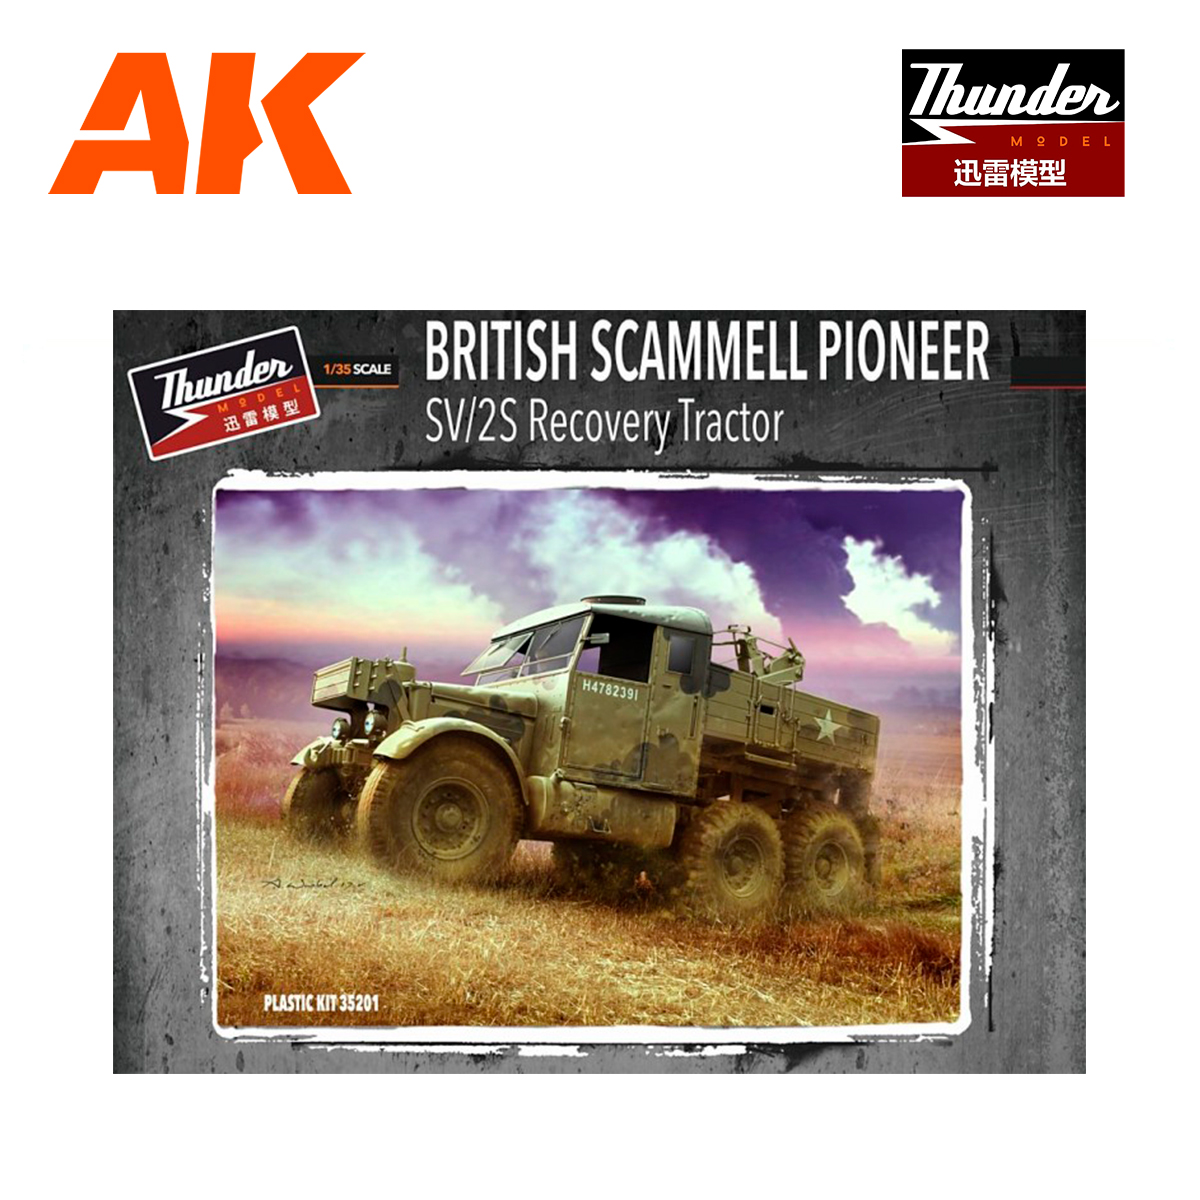 Thunder Model – 1/35 Scammell Pioneer Recovery SV/2S